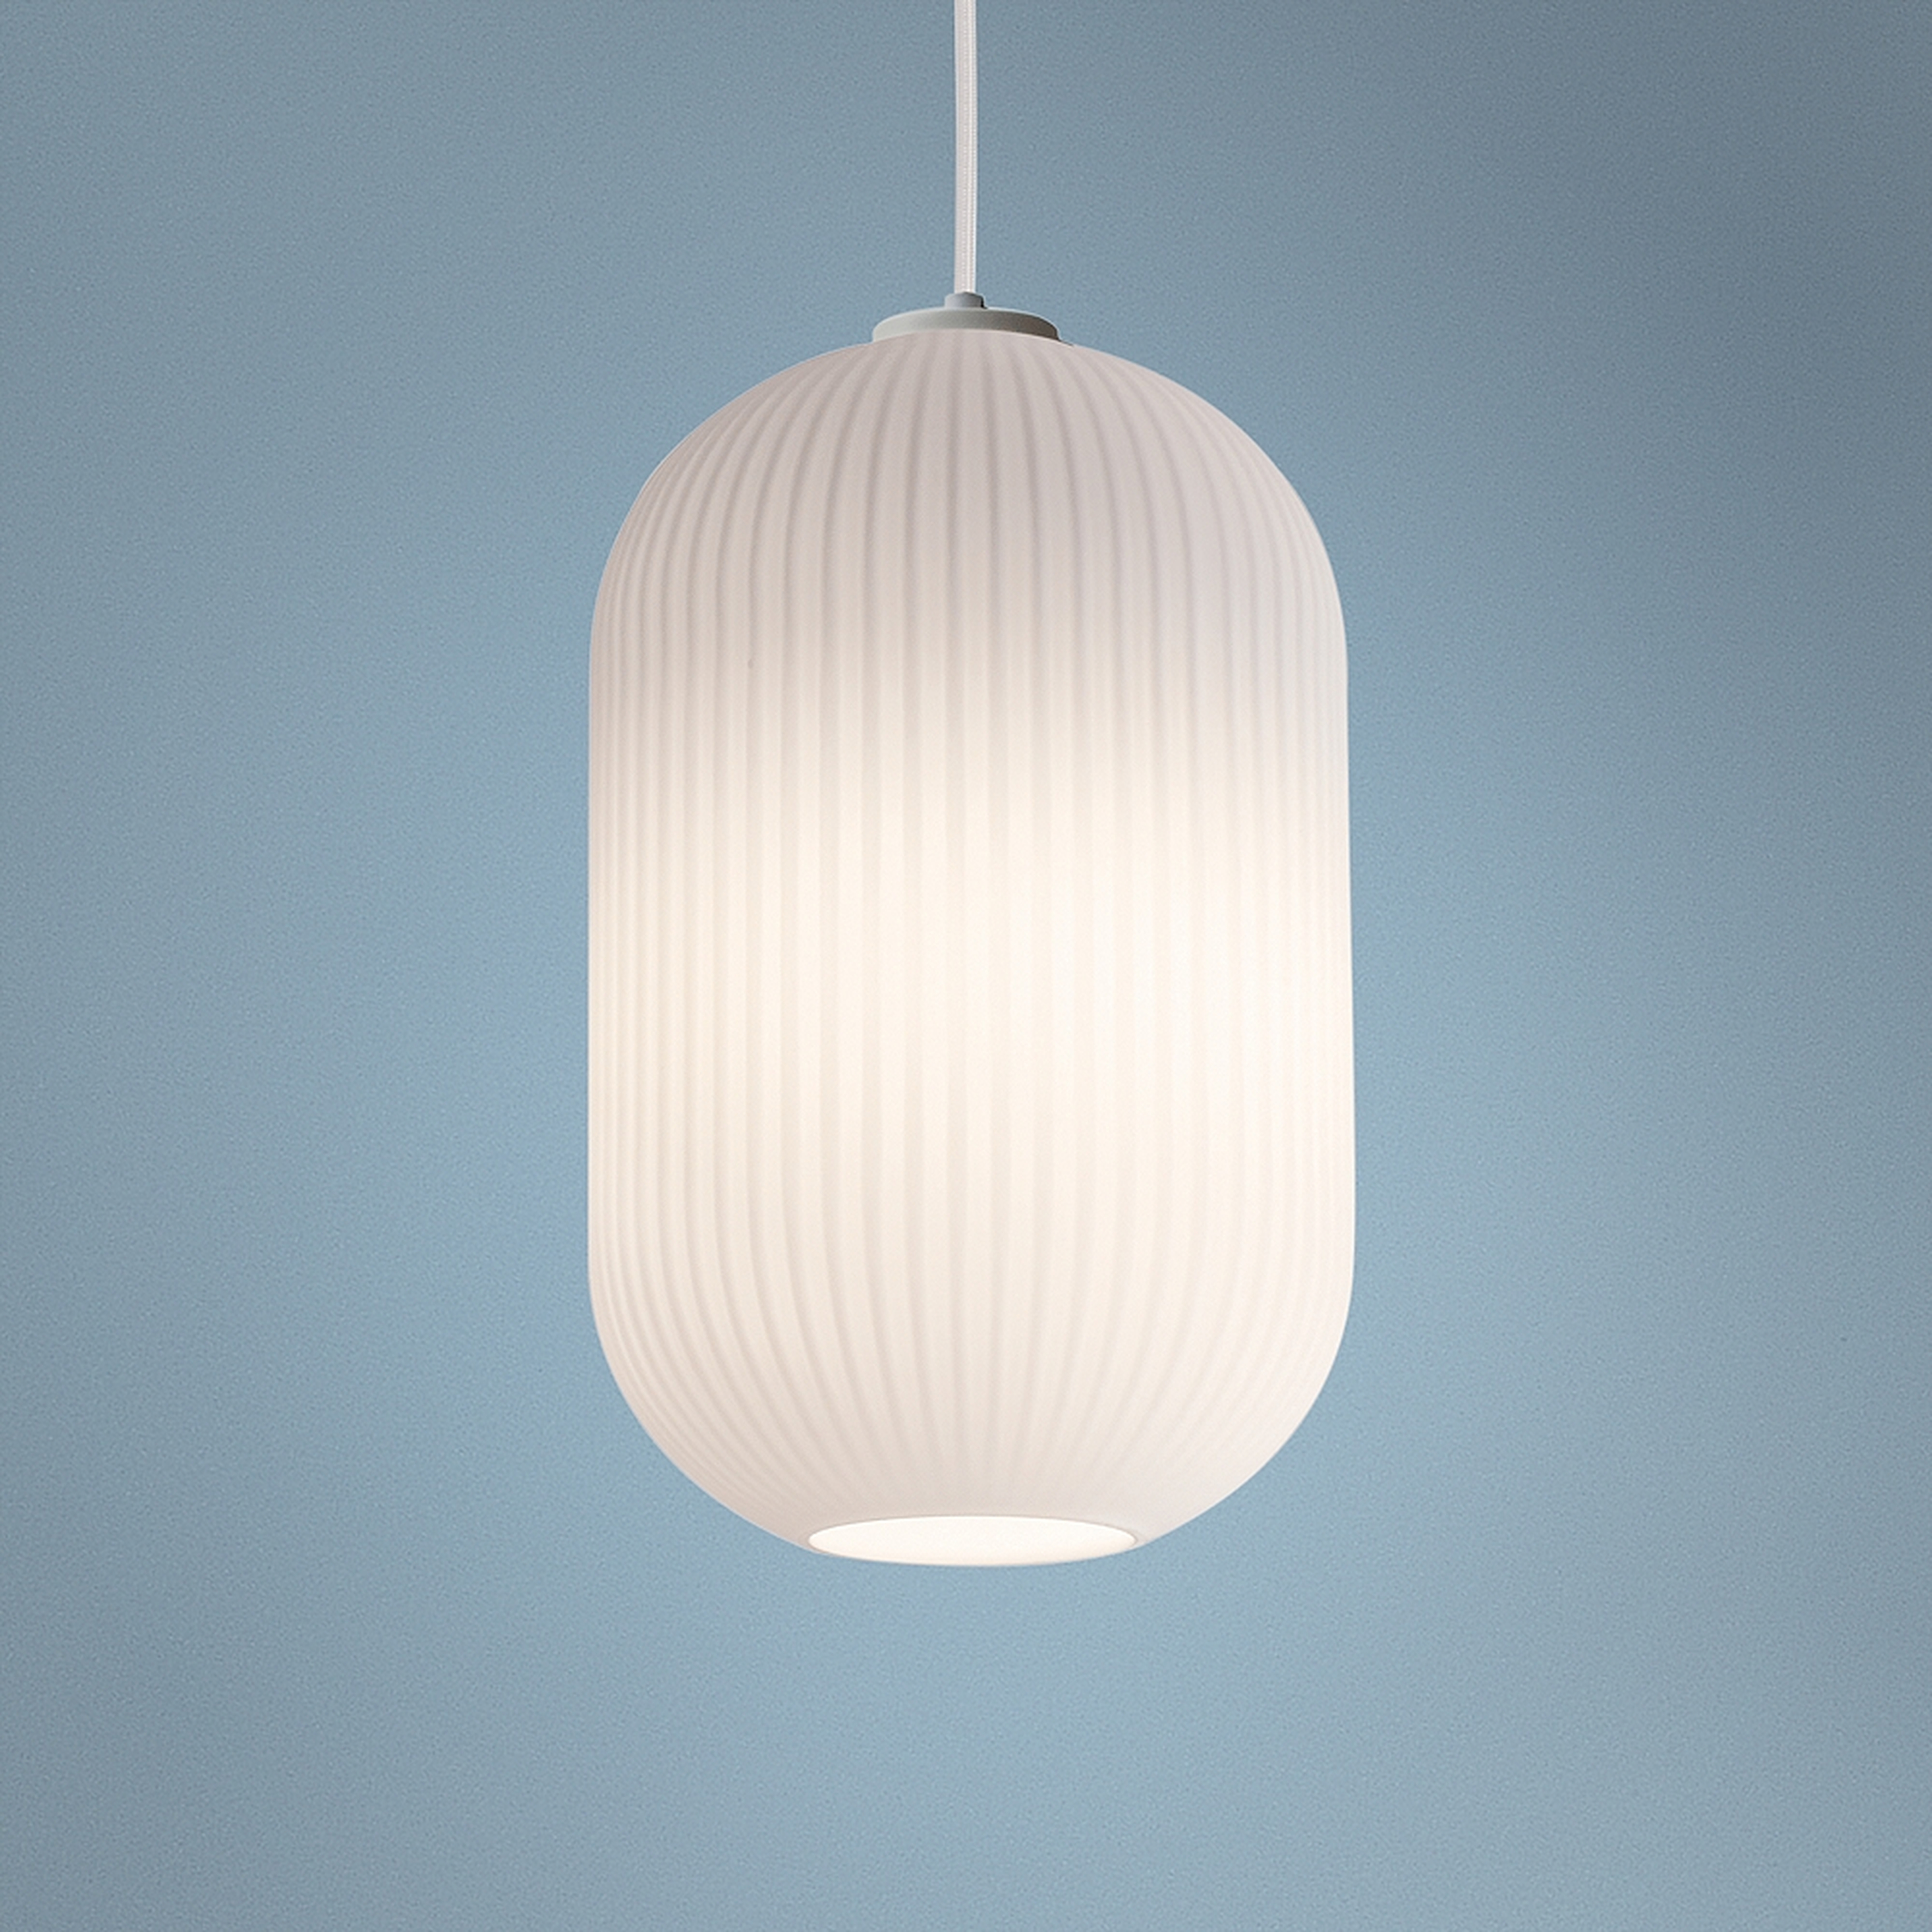 Callie 9" Wide Frosted White Ribbed Glass Mini Pendant - Style # 69D67 - Lamps Plus